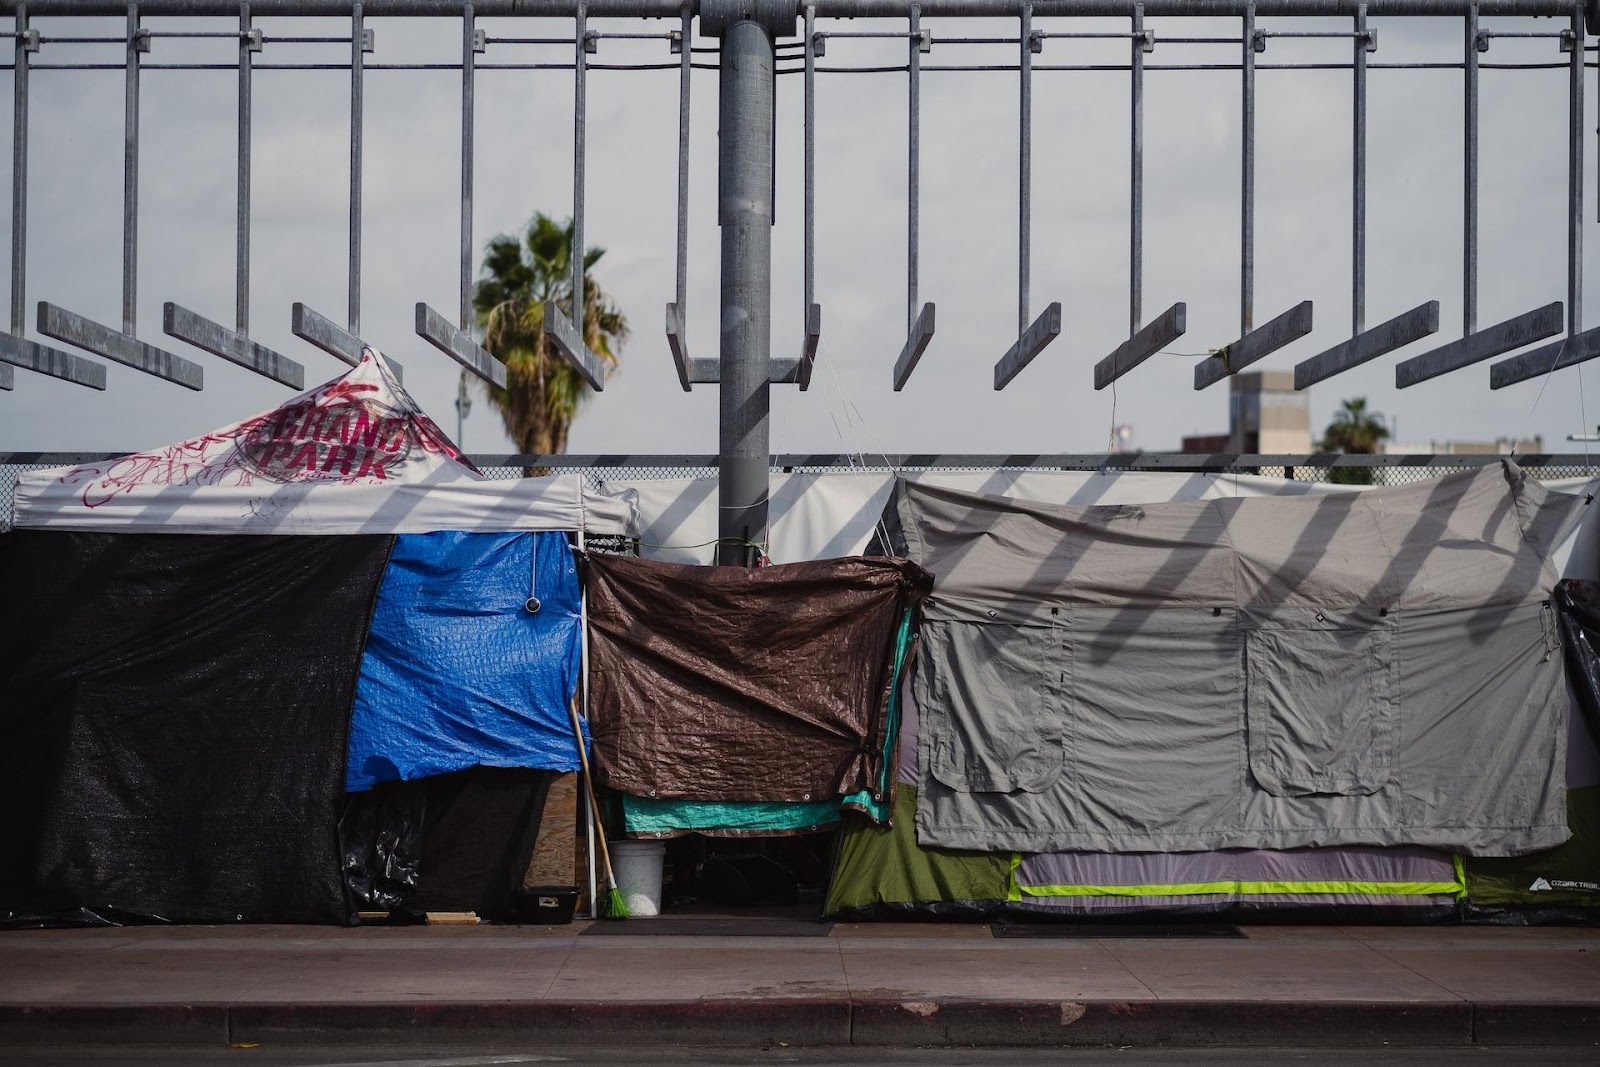 A picture of tents and tarps lining the street of L.A. where many homeless individuals live.